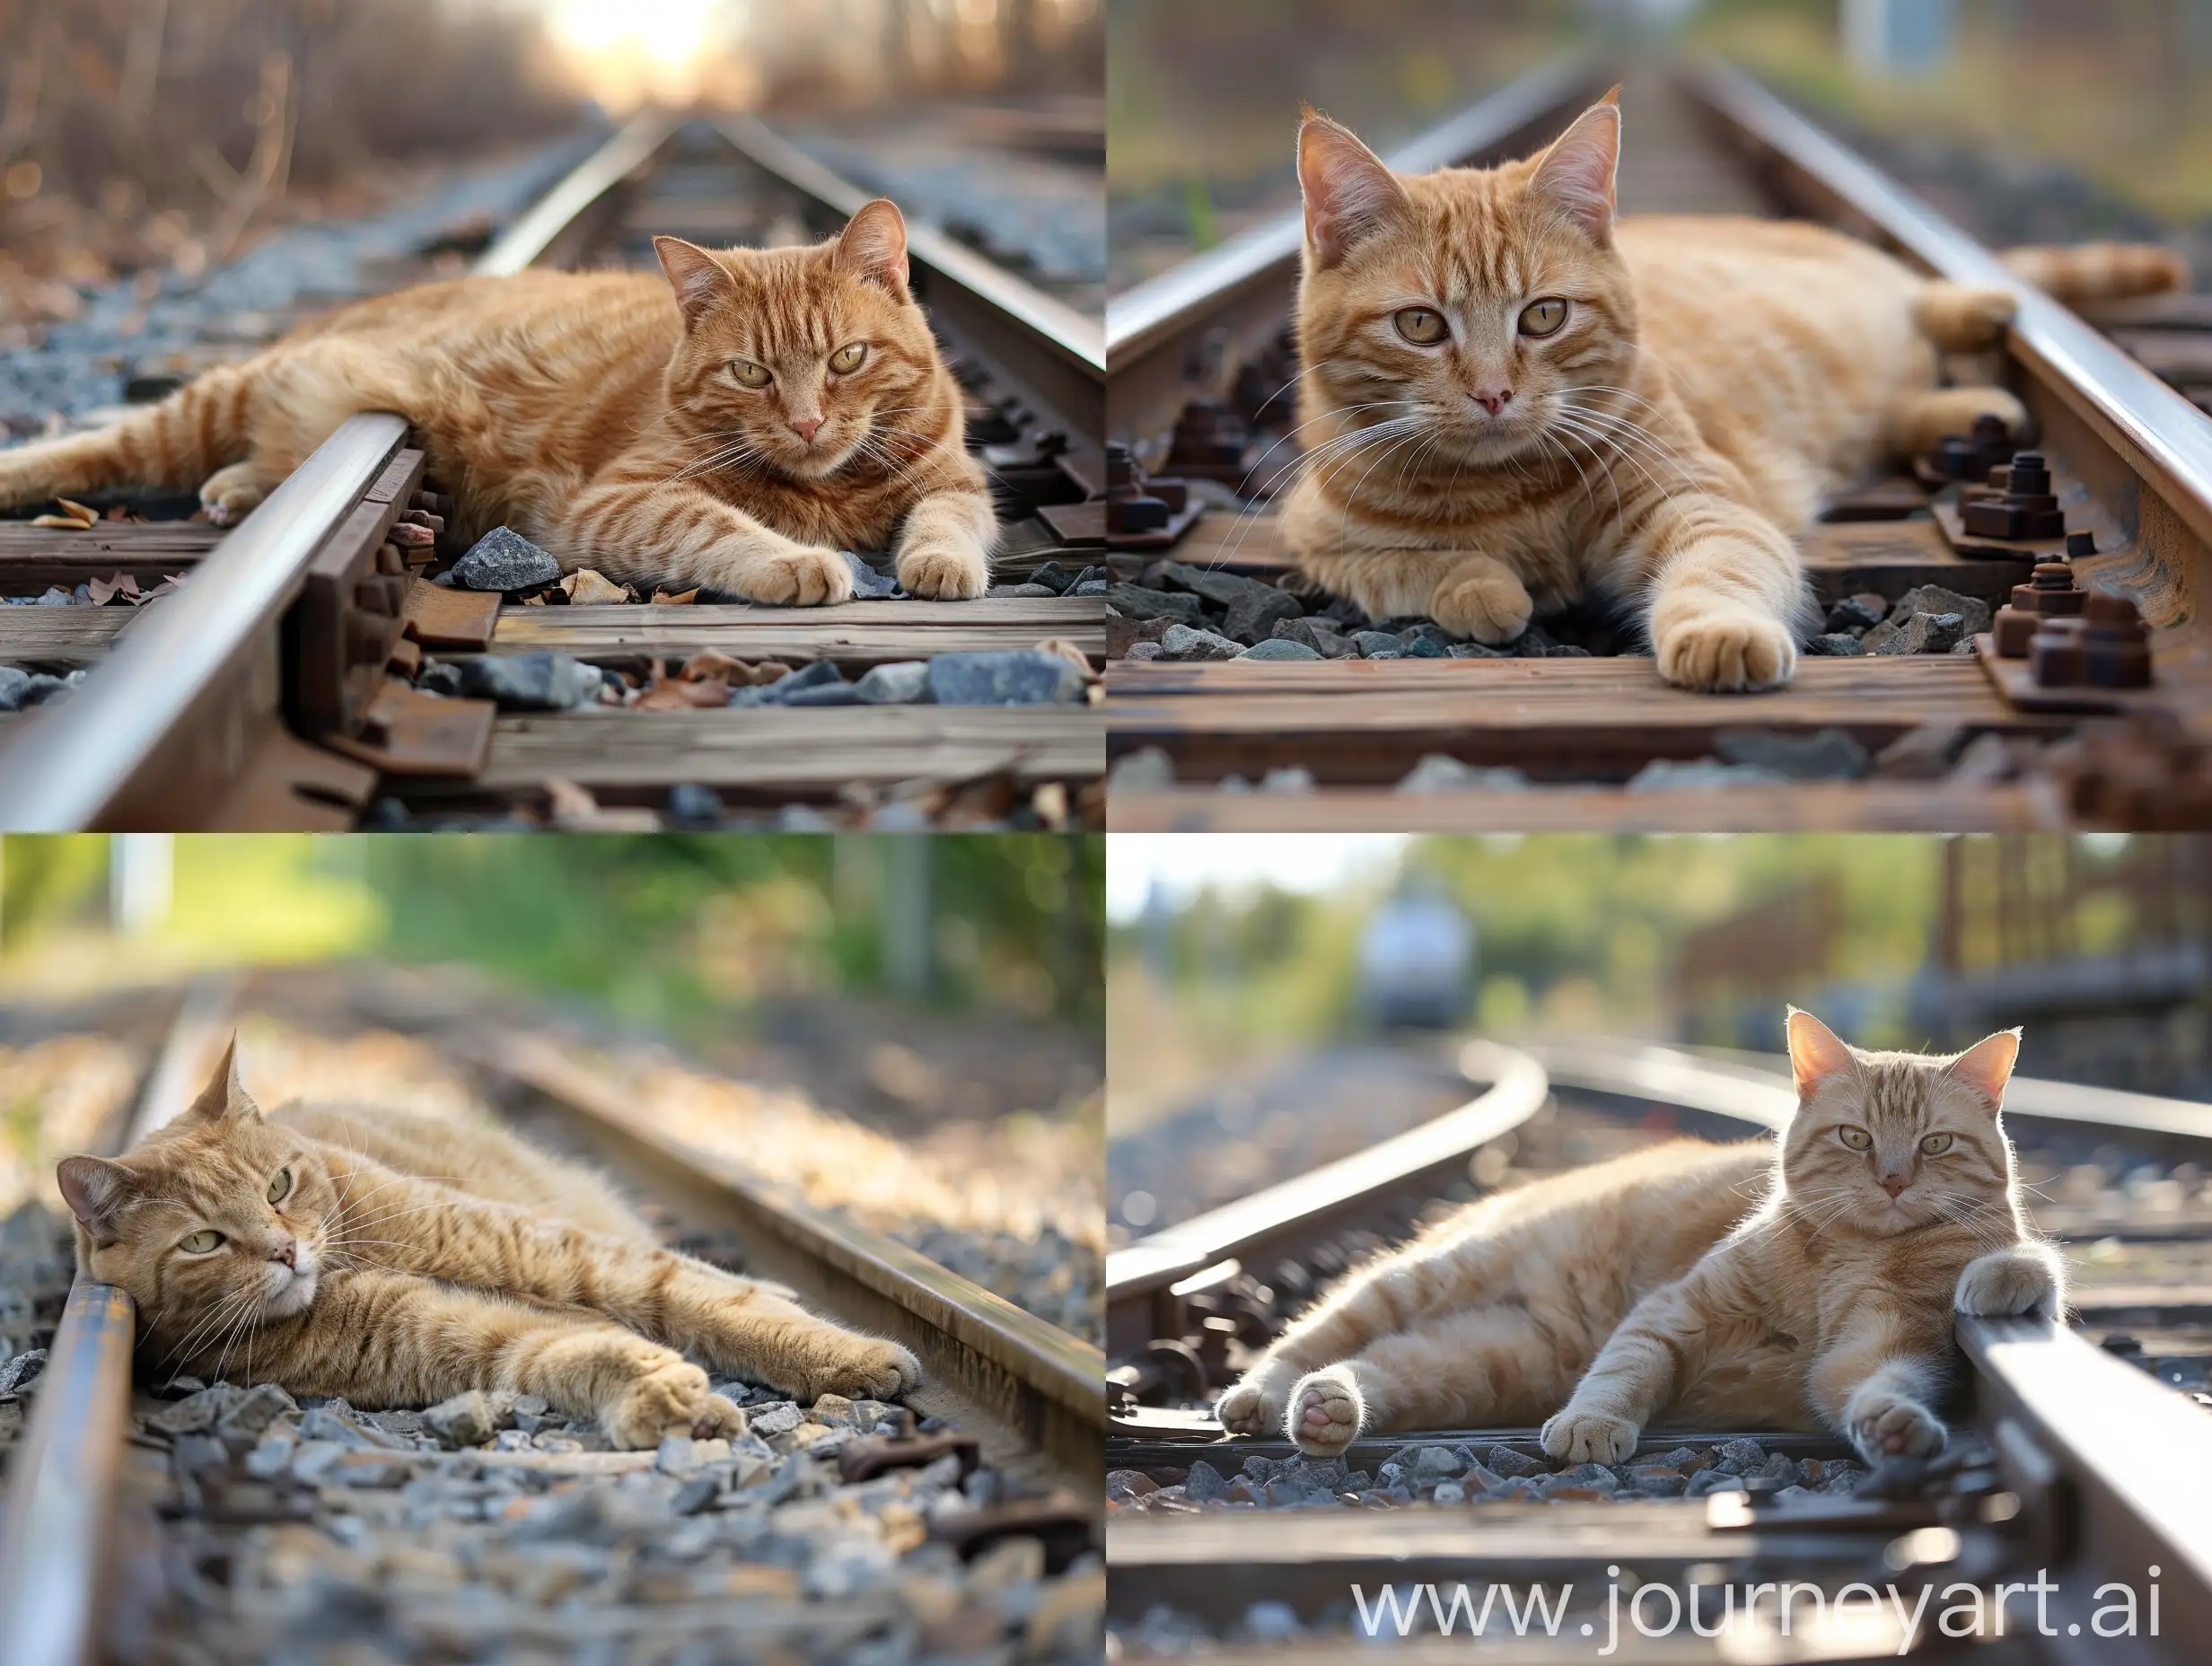 Relaxed-Pet-Cat-Lounging-on-Train-Tracks